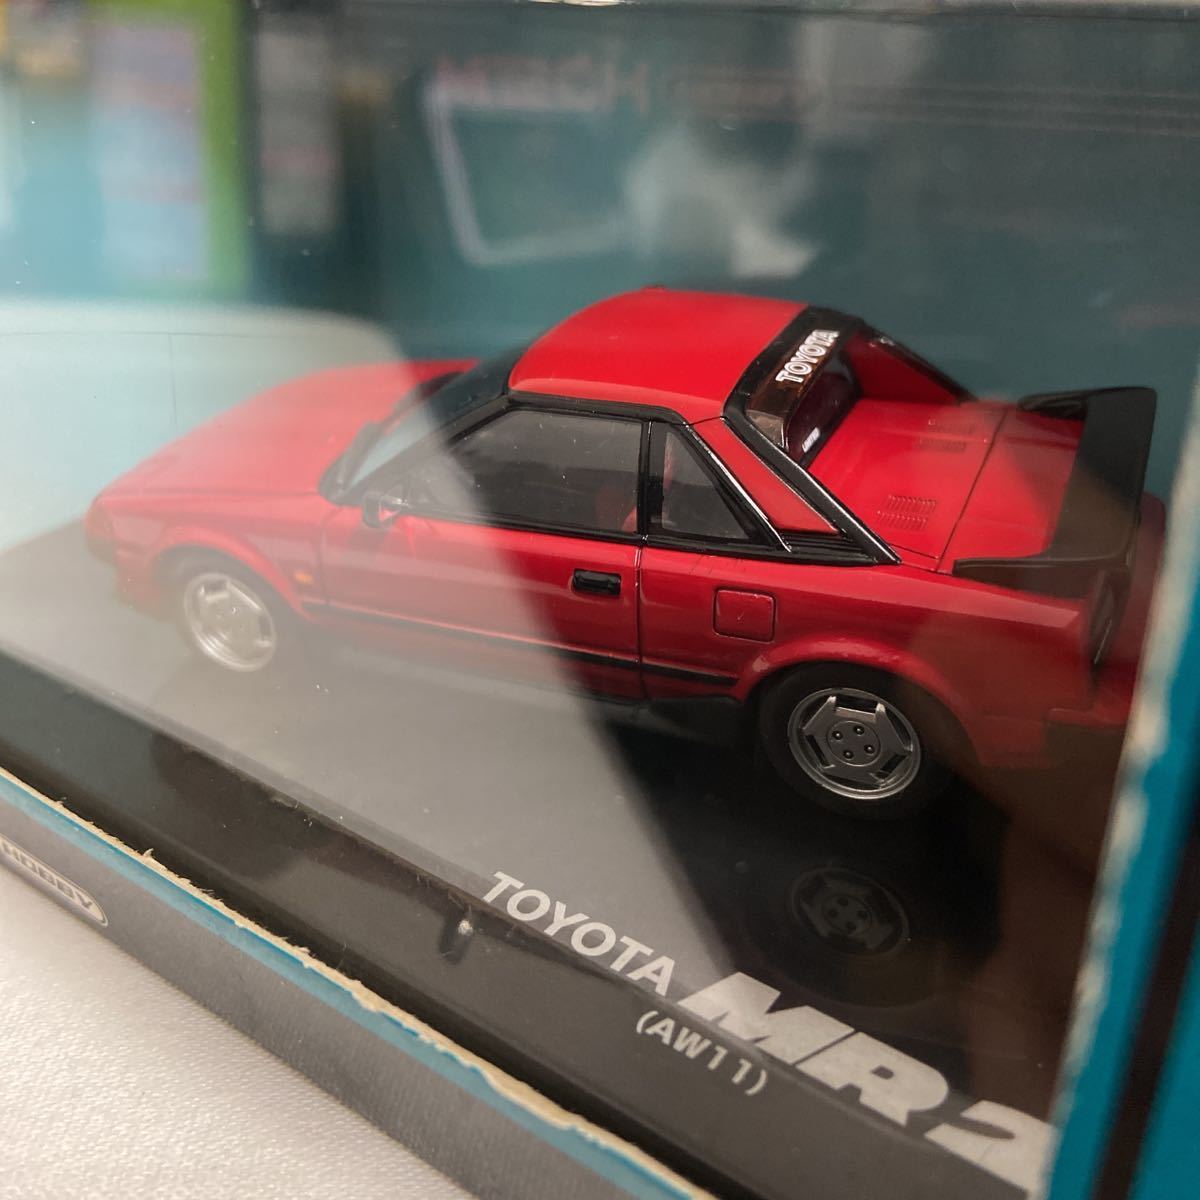 MTECH 1/43 TOYOTA MR2 AW11 Red Epo k company M Tec Toyota red old car minicar model car domestic production famous car 